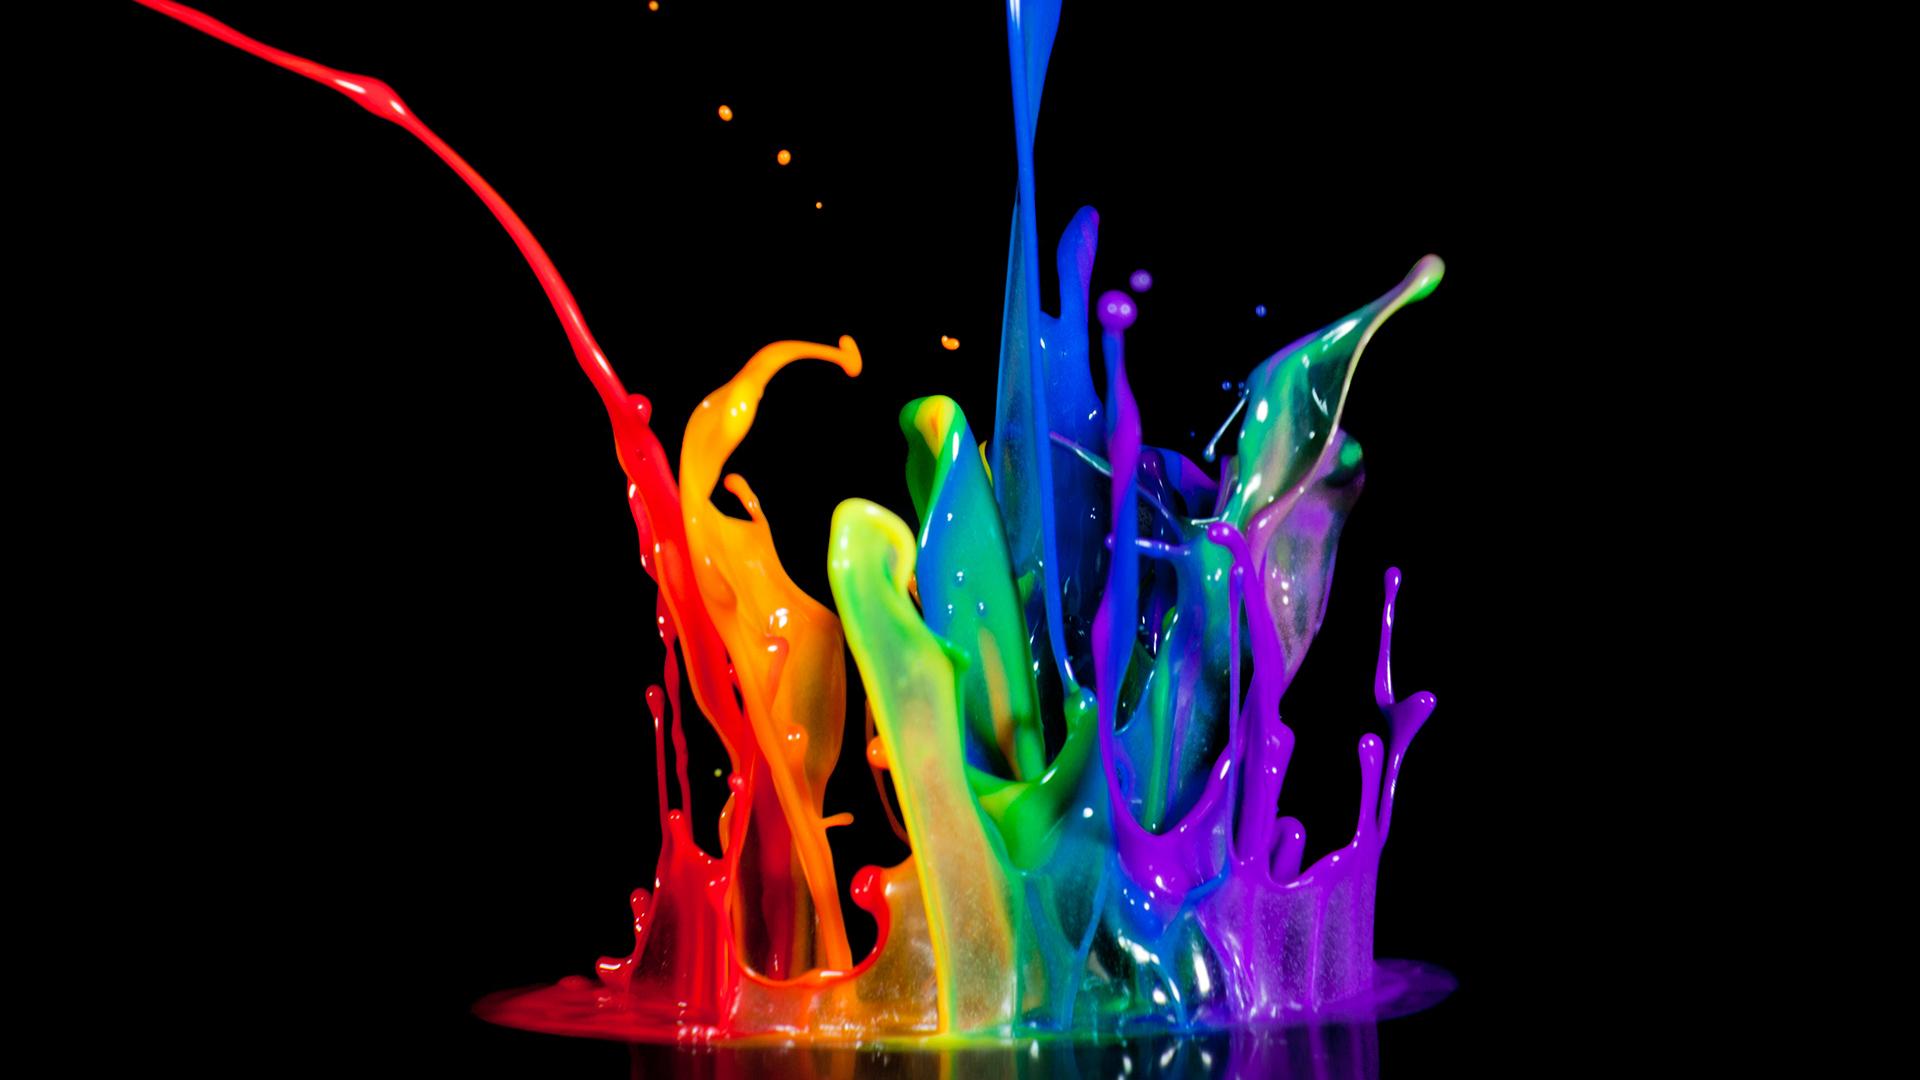 HD Wallpaper Abstract Colorful Cool Wallpaper55 Best